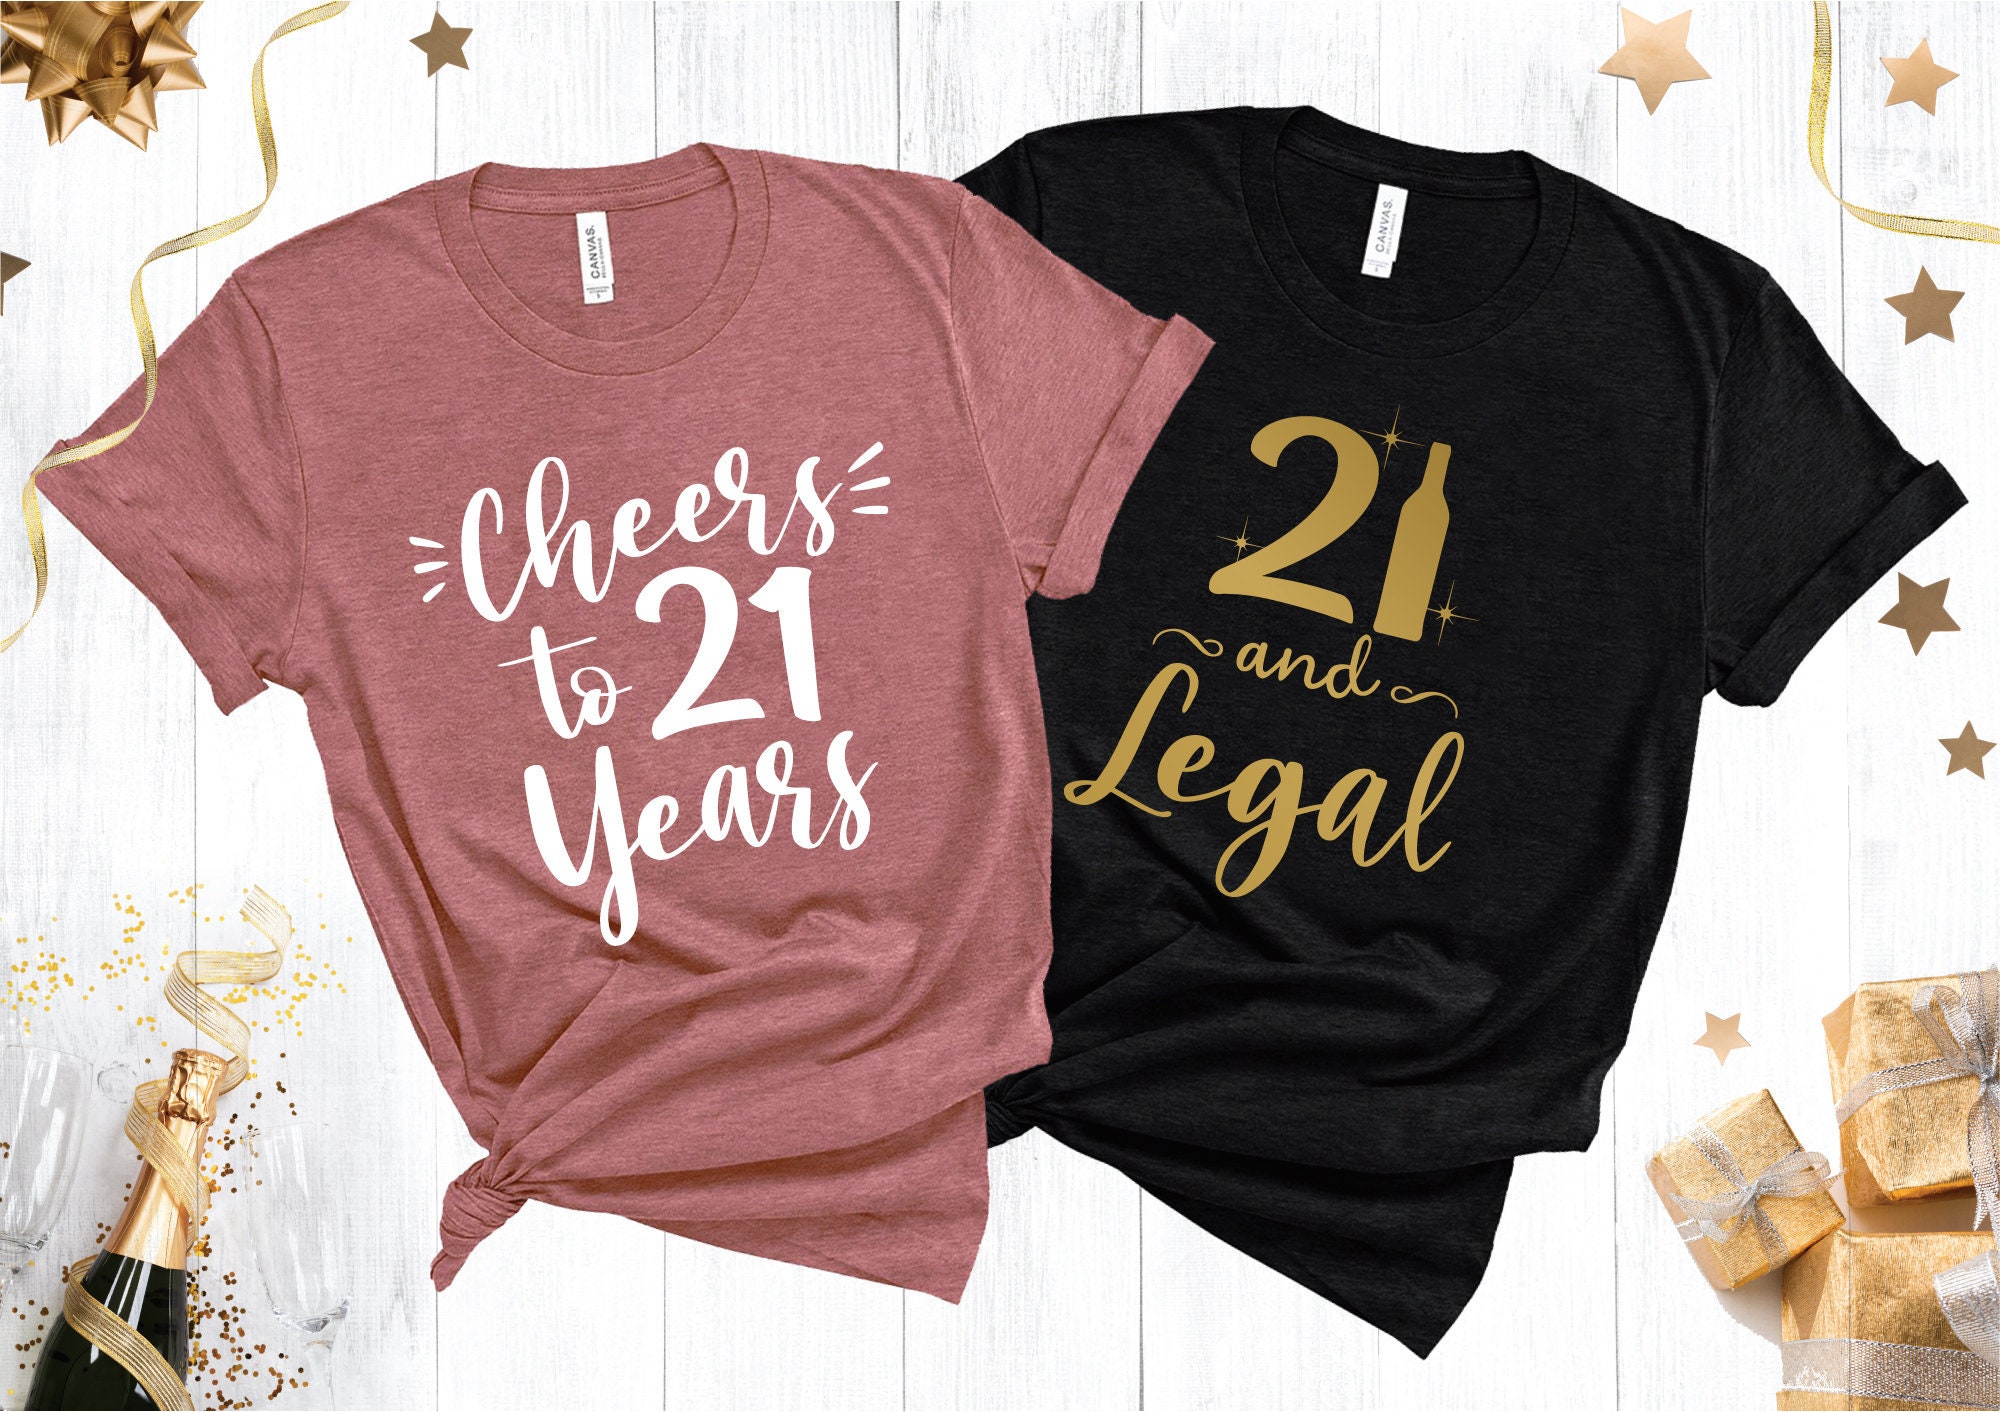 21st Birthday Shirt, Group Shirts, 21 and Legal, 21st Birthday Girl, Birthday Crew, Birthday Group Shirts for Women, Finally Legal, Gift